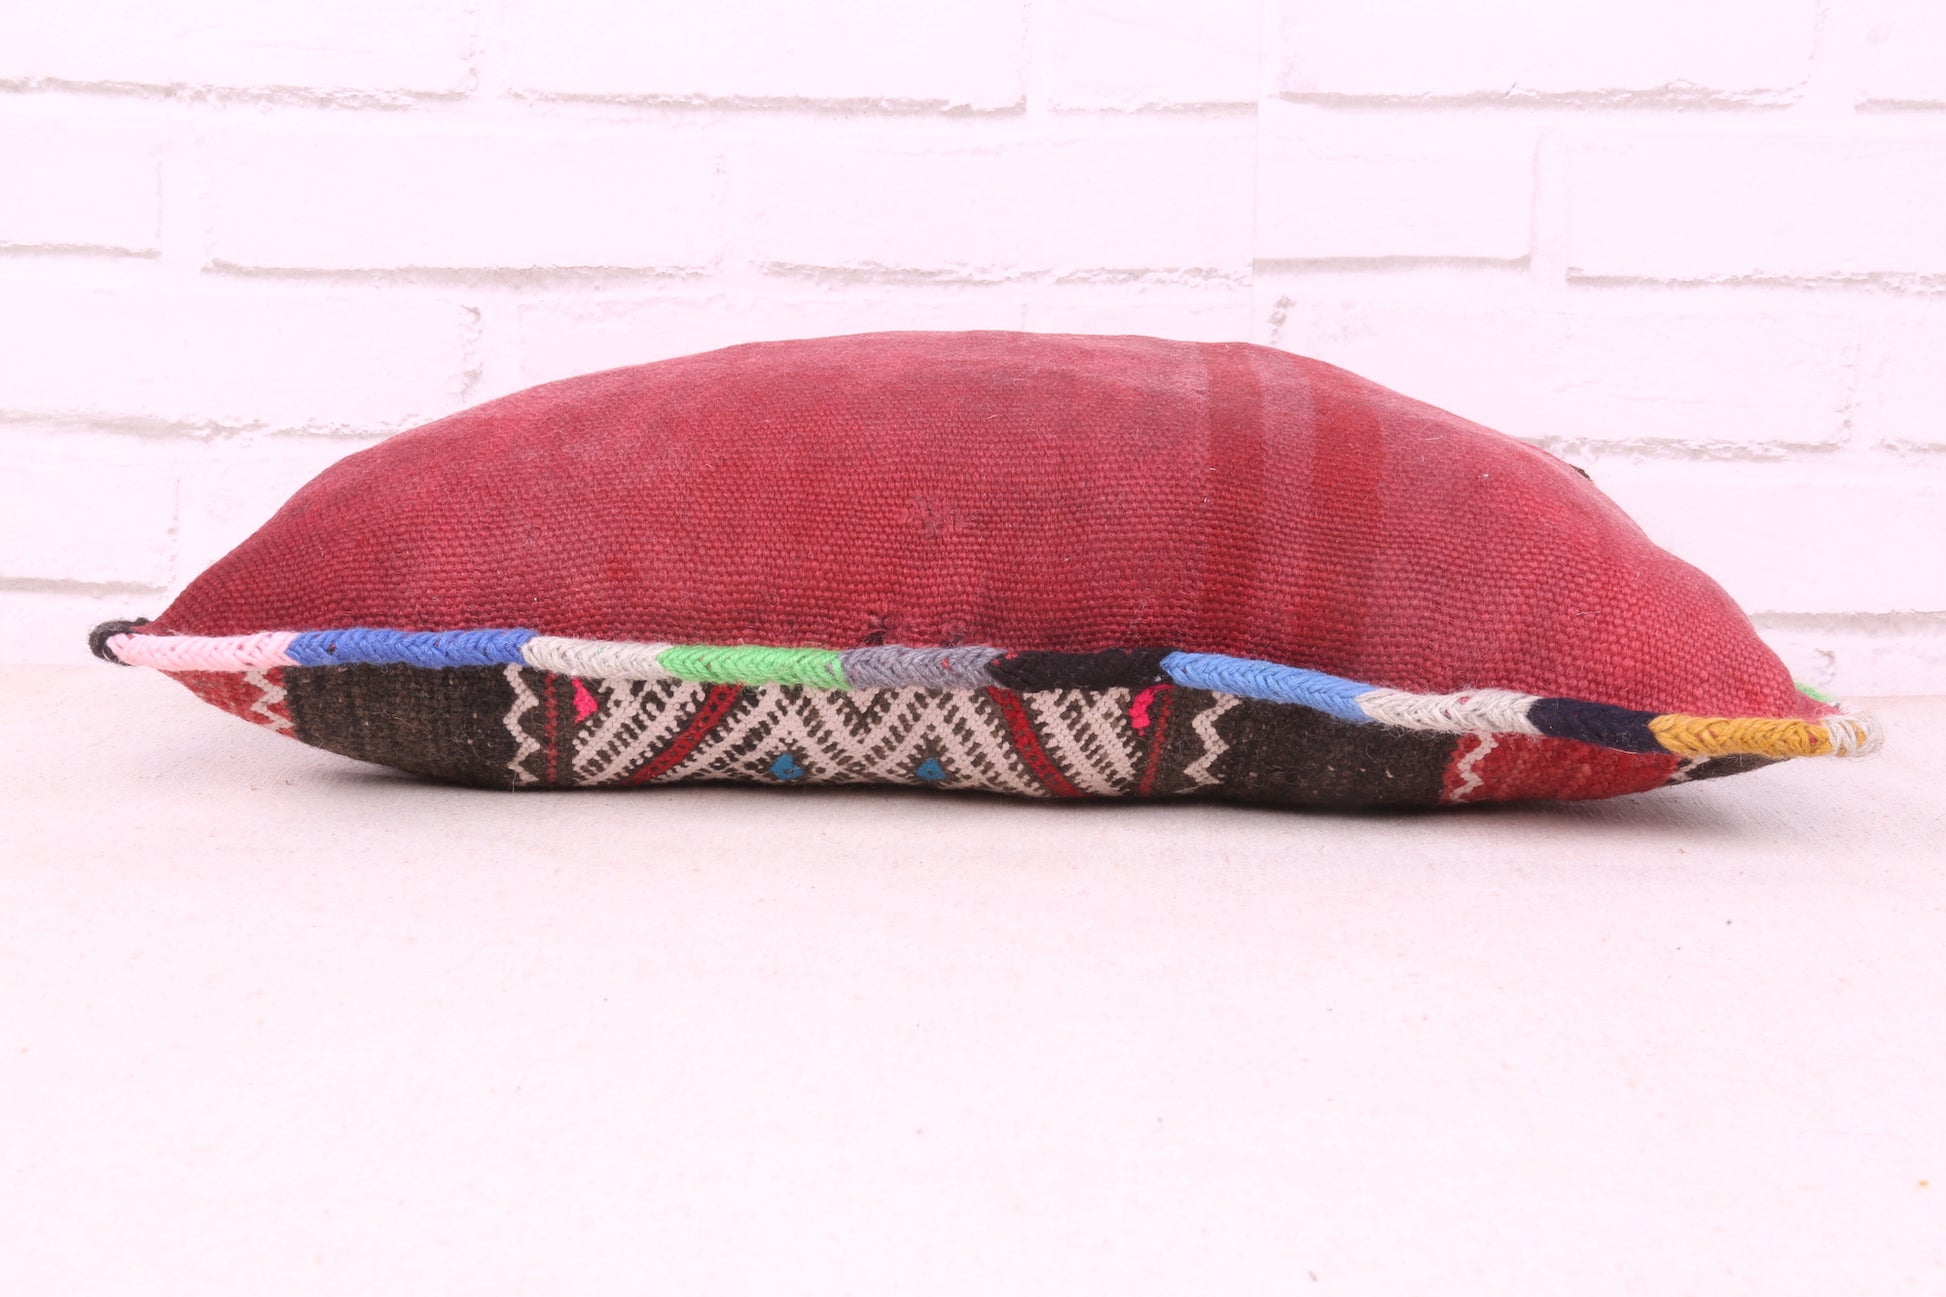 Moroccan berber rug pillow 12.5 inches X 19.6 inches